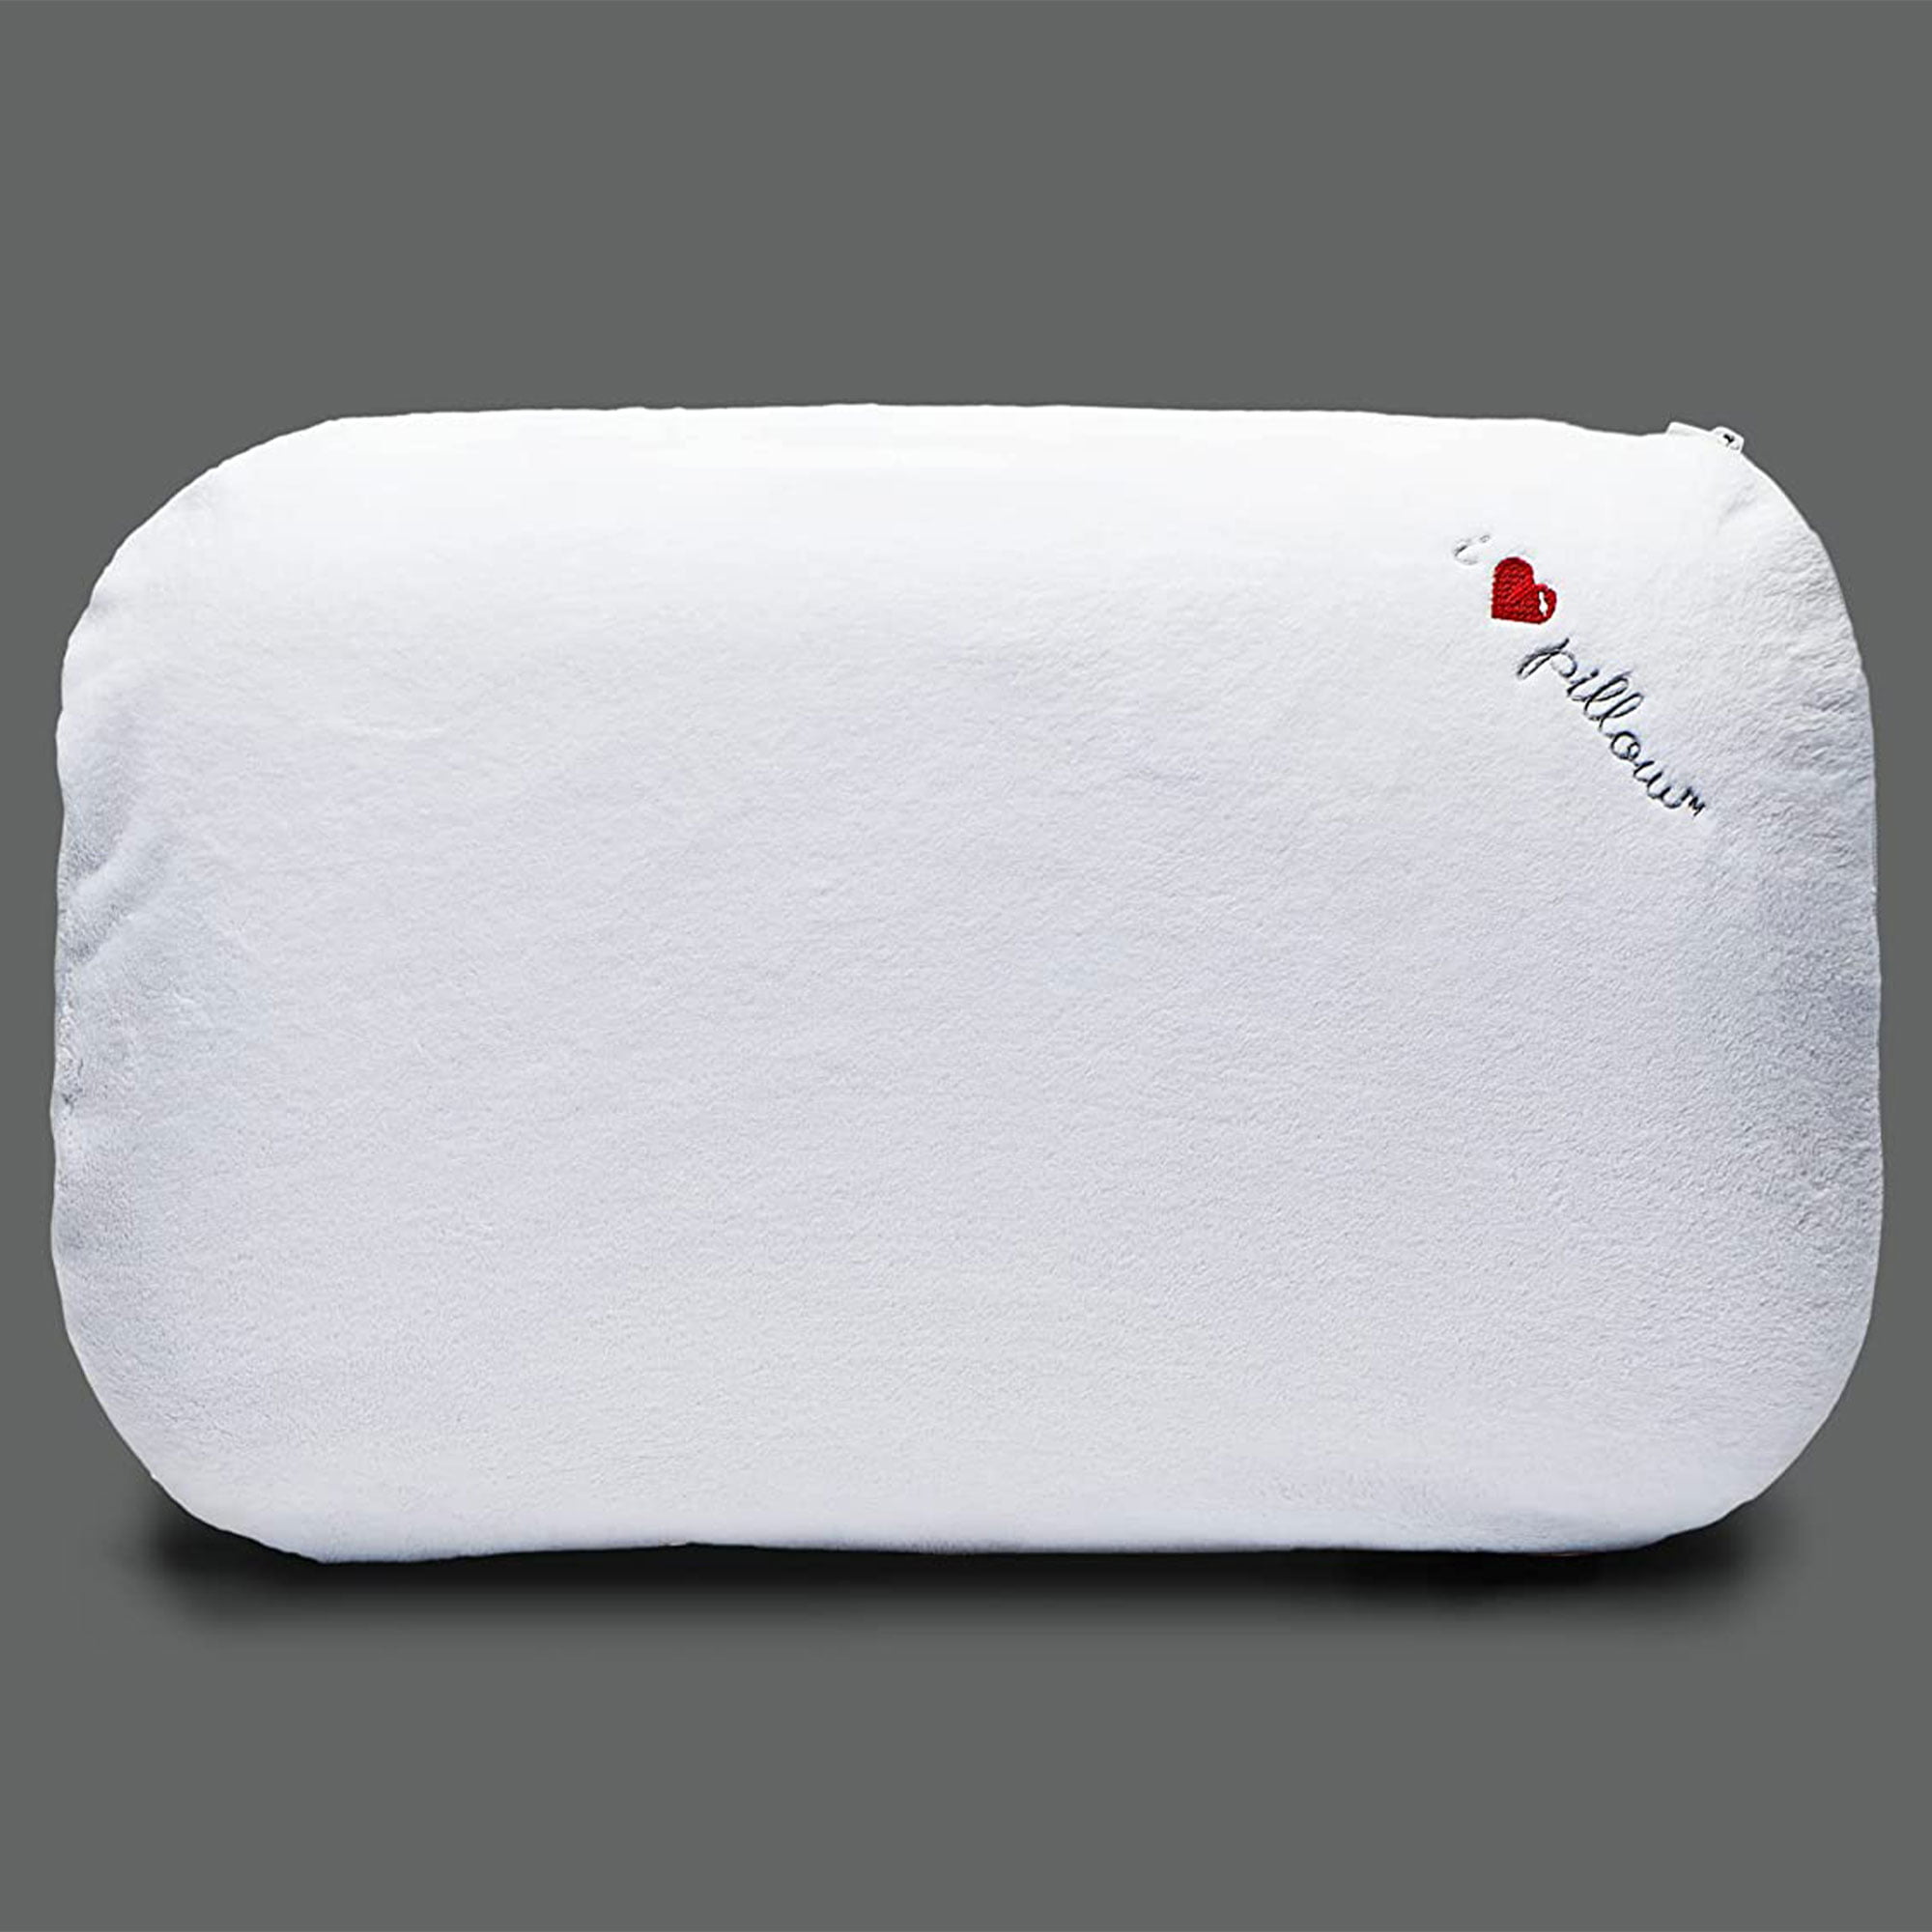 I Love Pillow Ergonomic Contour Sleeping Pillow with Cover White Queen Sized 